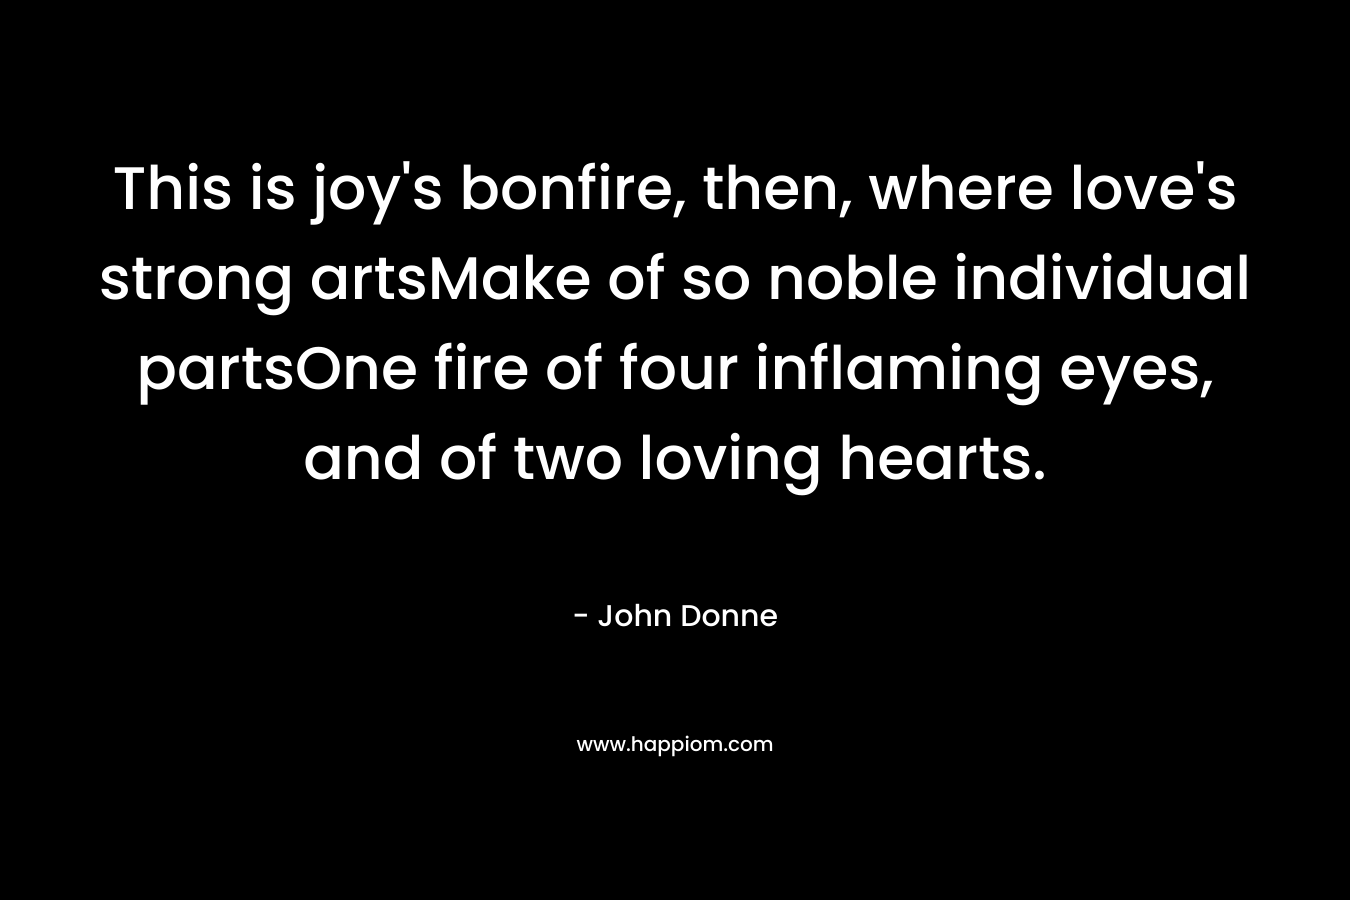 This is joy’s bonfire, then, where love’s strong artsMake of so noble individual partsOne fire of four inflaming eyes, and of two loving hearts. – John Donne